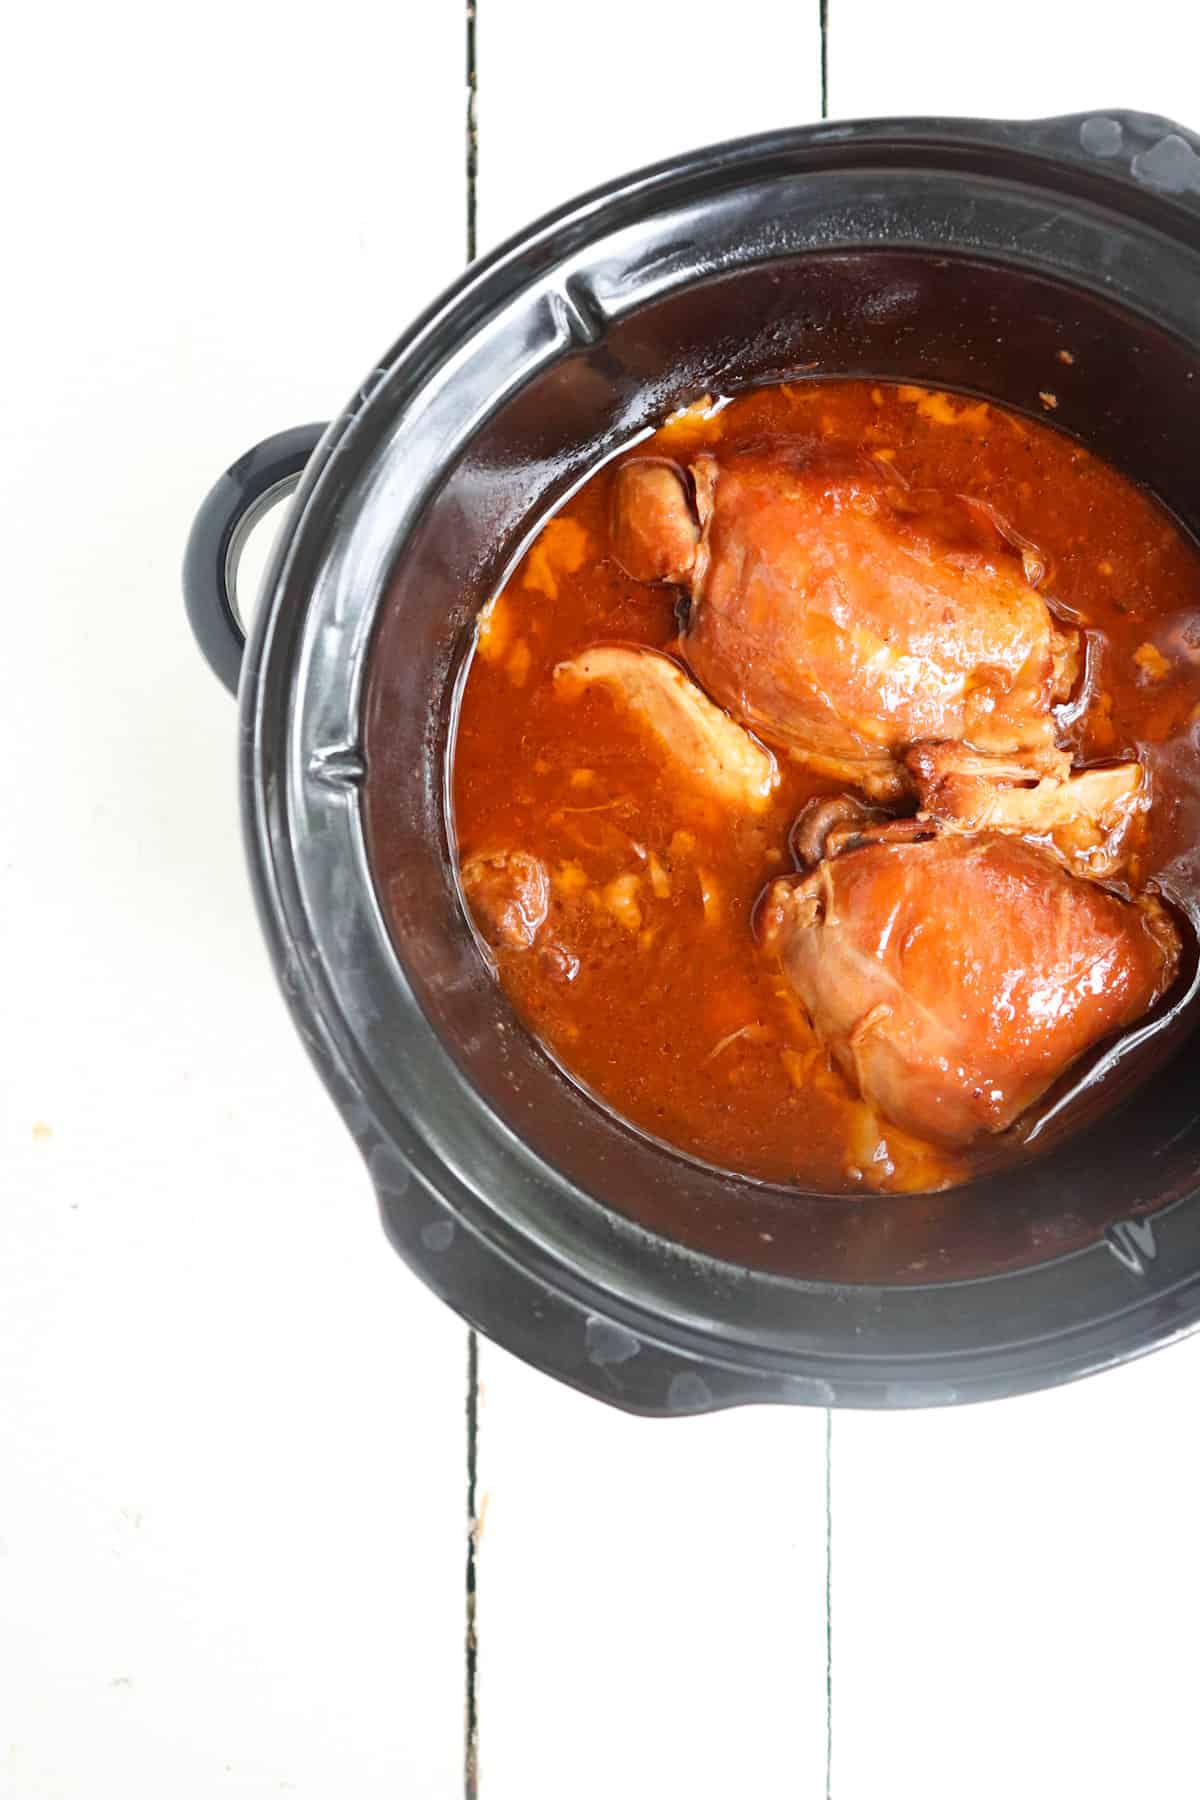 cooked chicken thighs in a black crock pot.